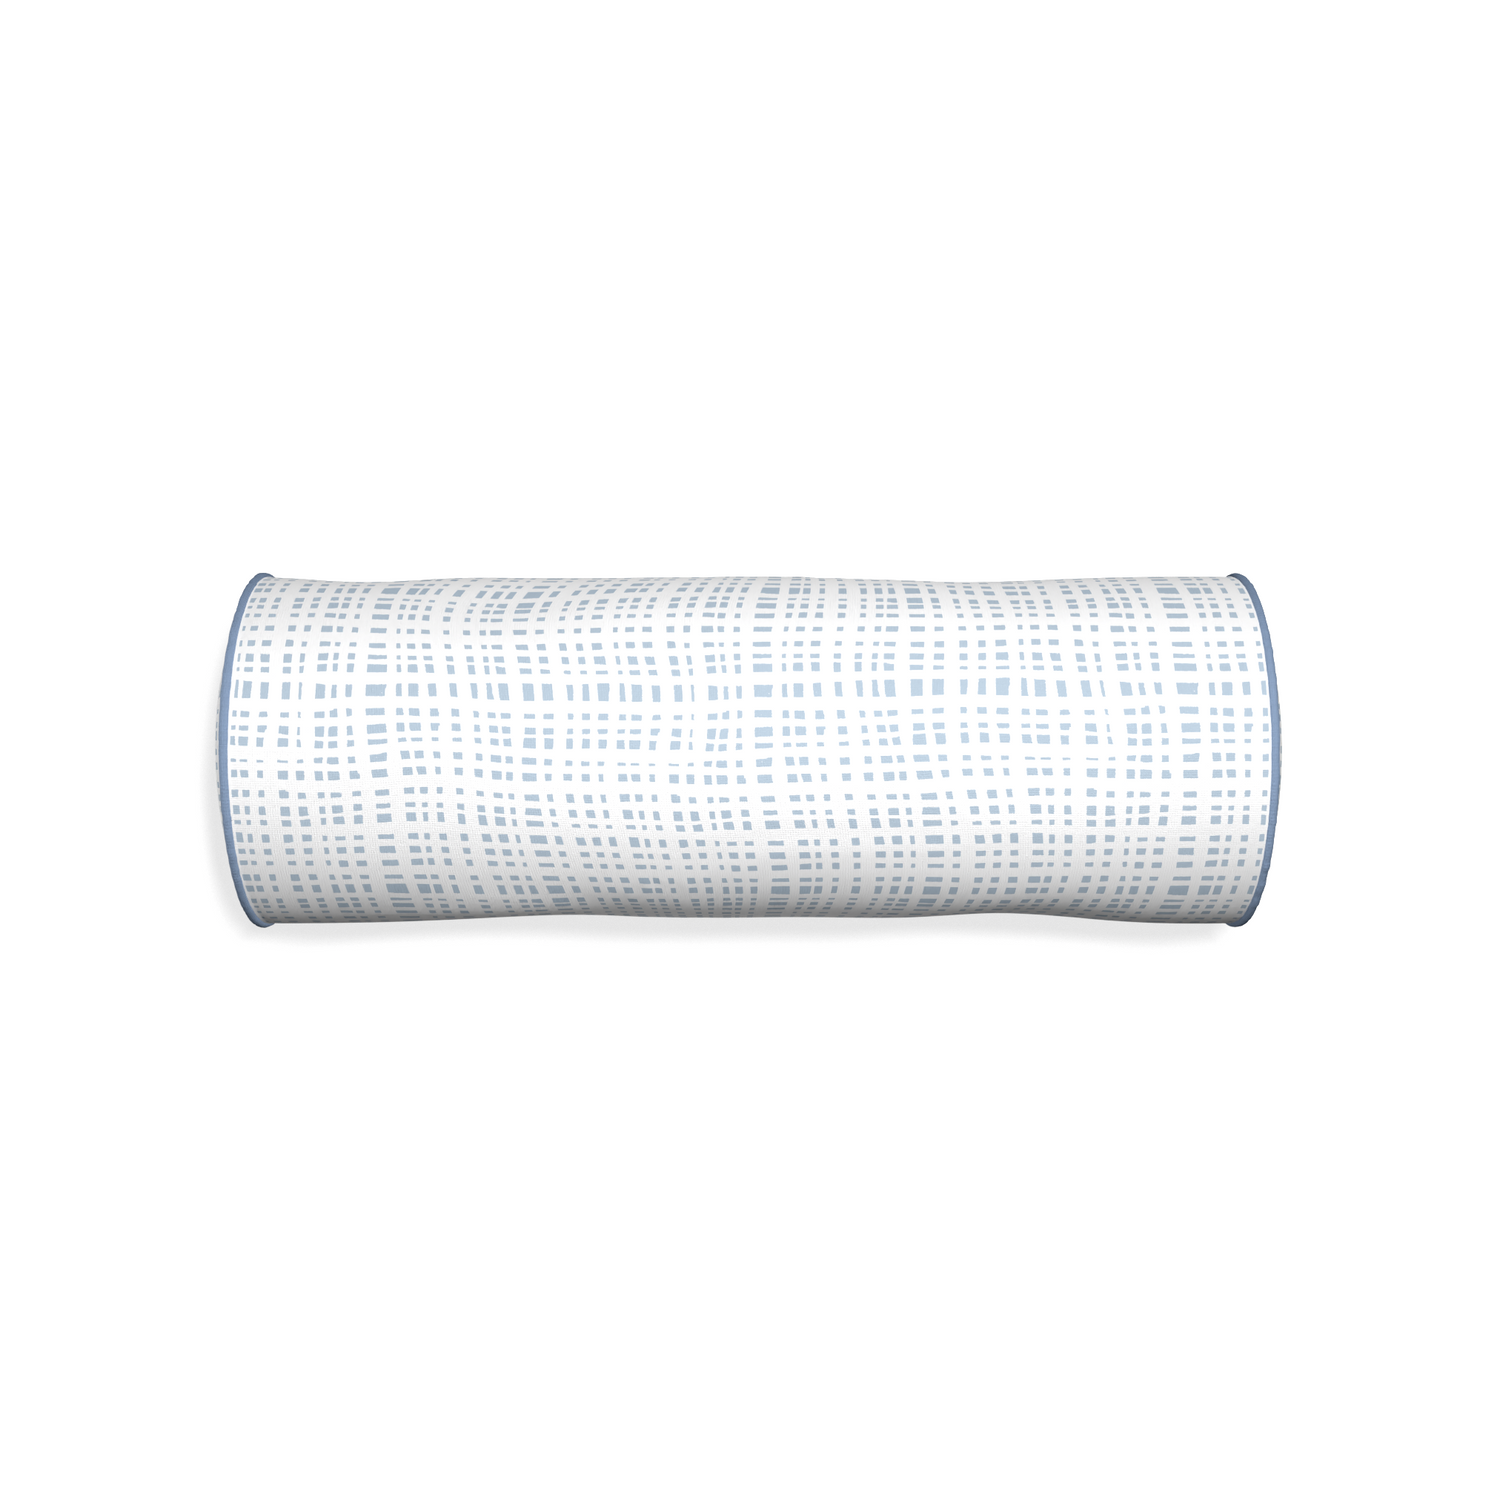 Bolster ginger custom plaid sky bluepillow with sky piping on white background